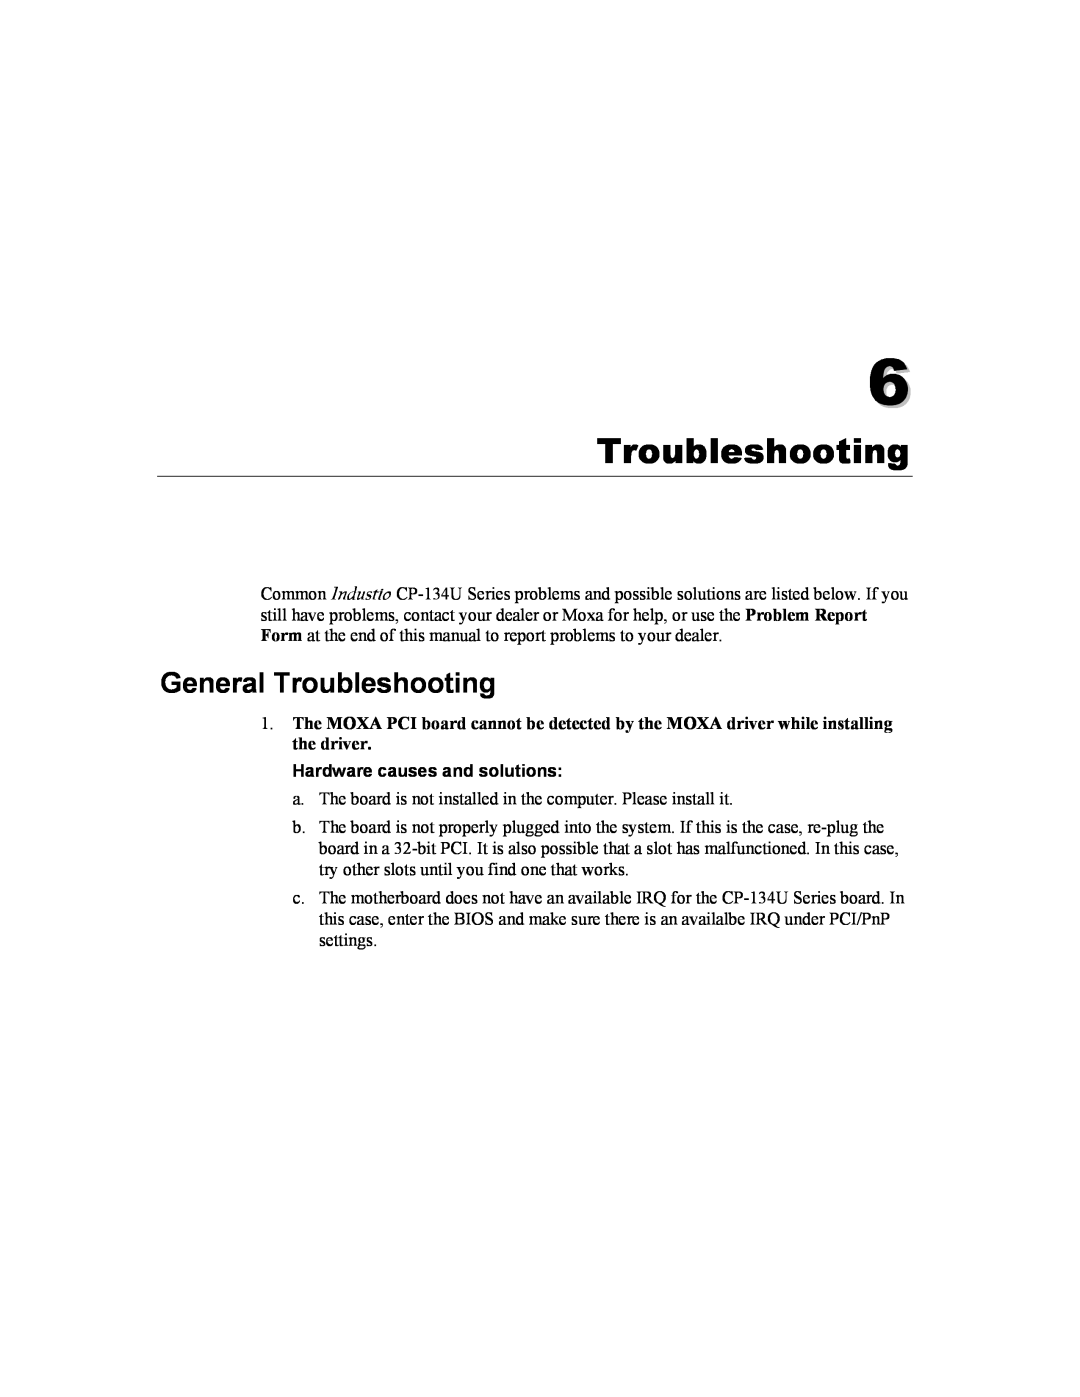 Moxa Technologies CP-134U user manual General Troubleshooting, Hardware causes and solutions 